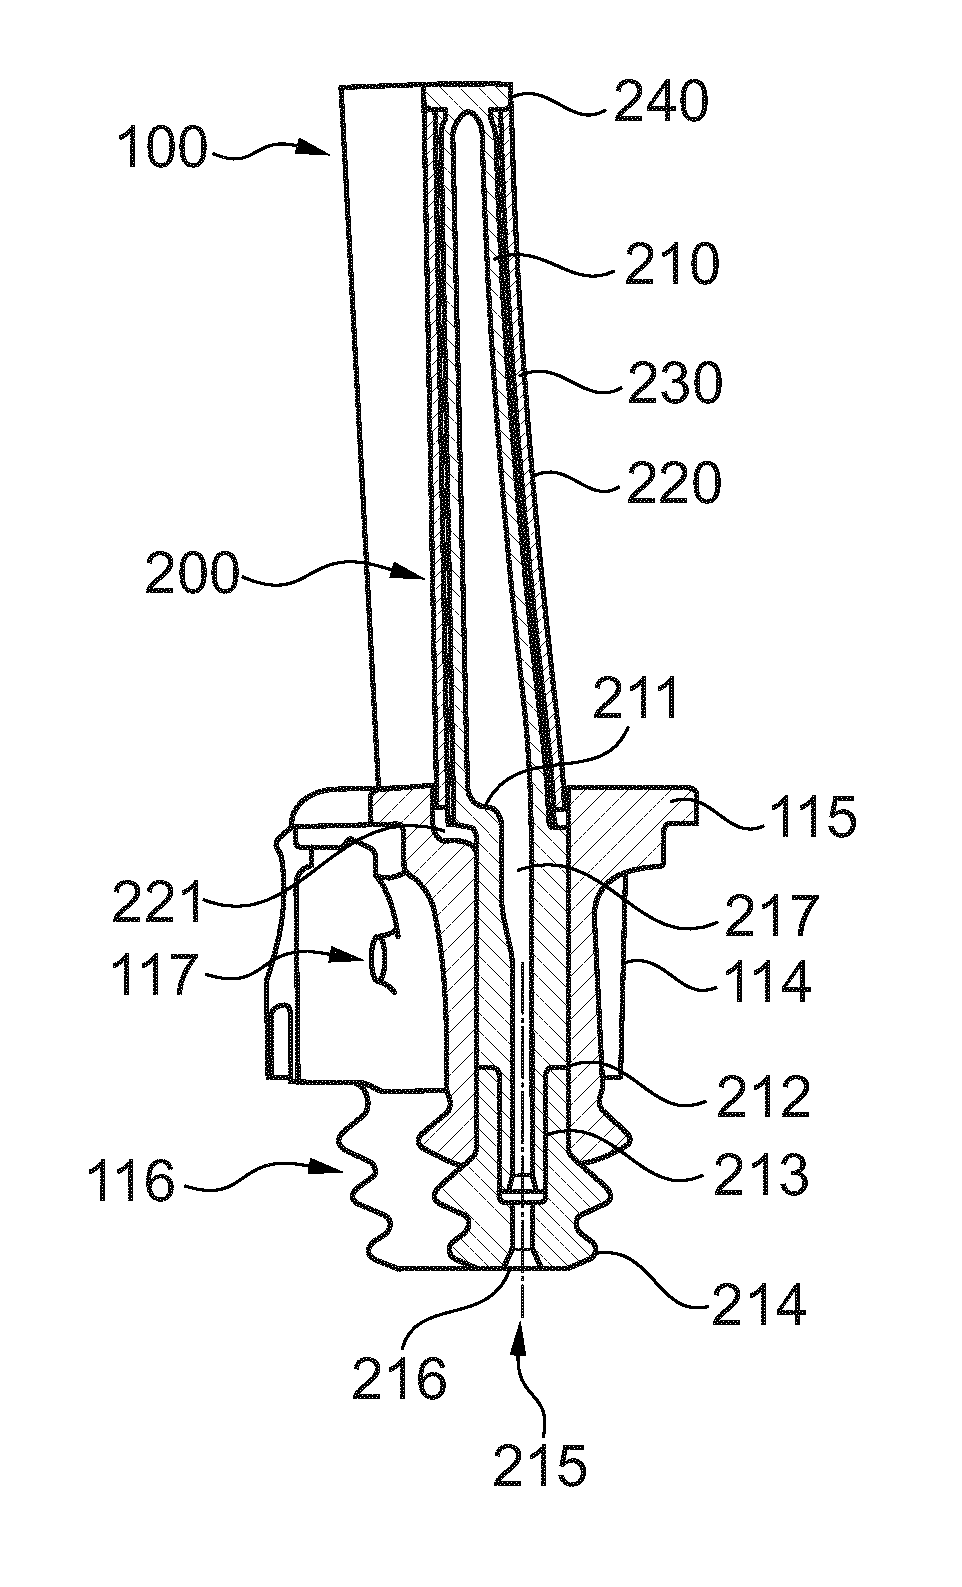 Rotor blade or guide vane assembly